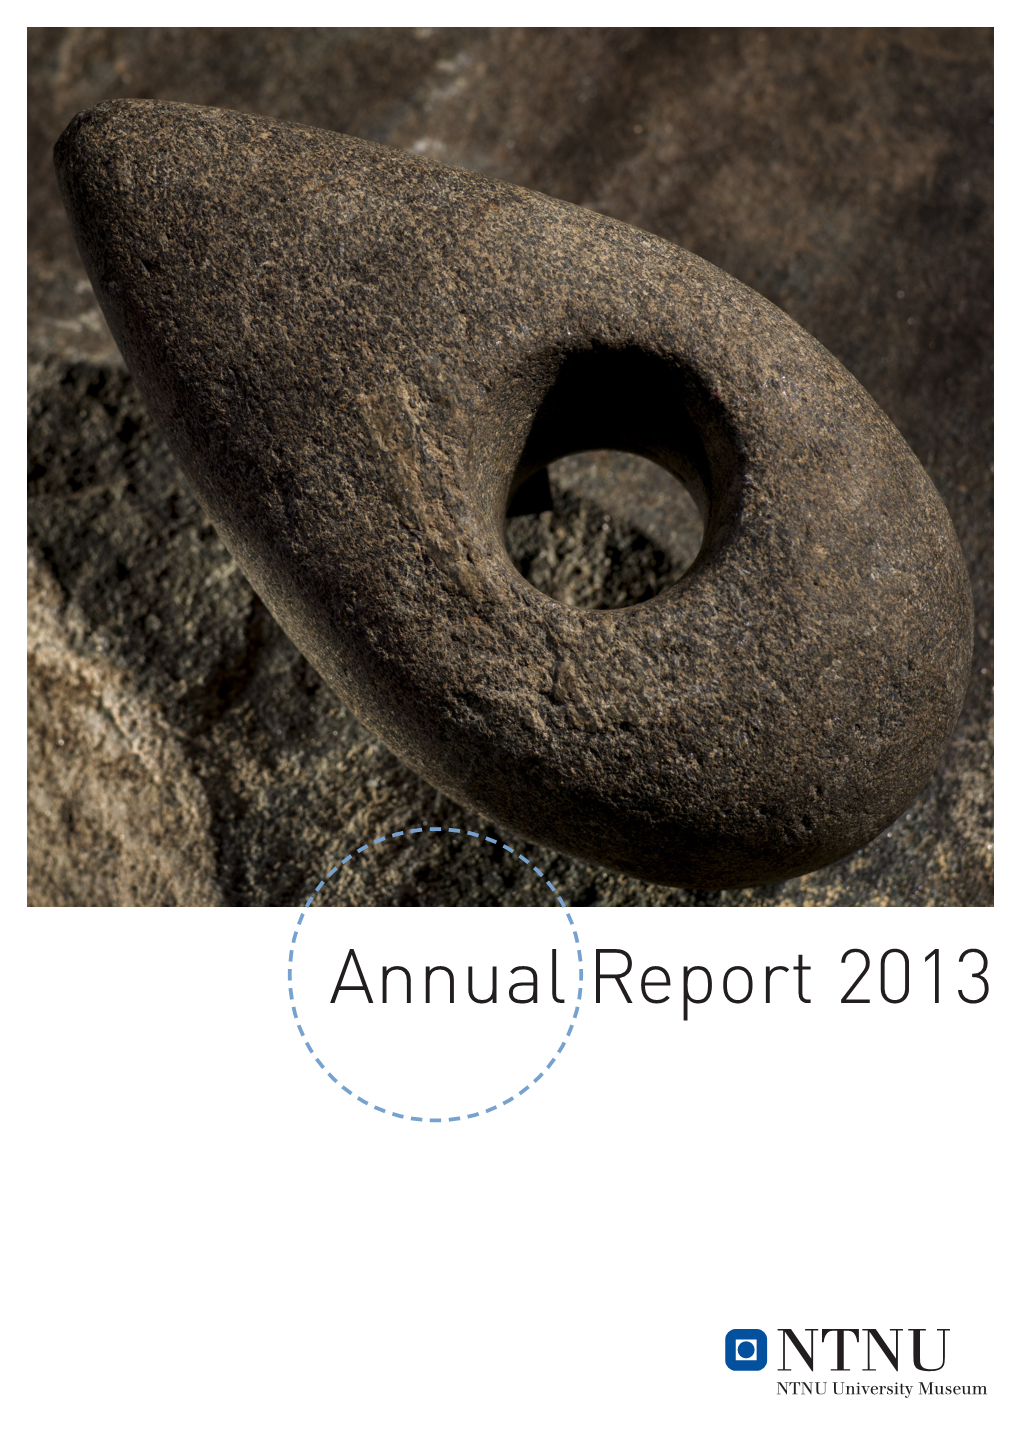 Annual Report 2013 Visions